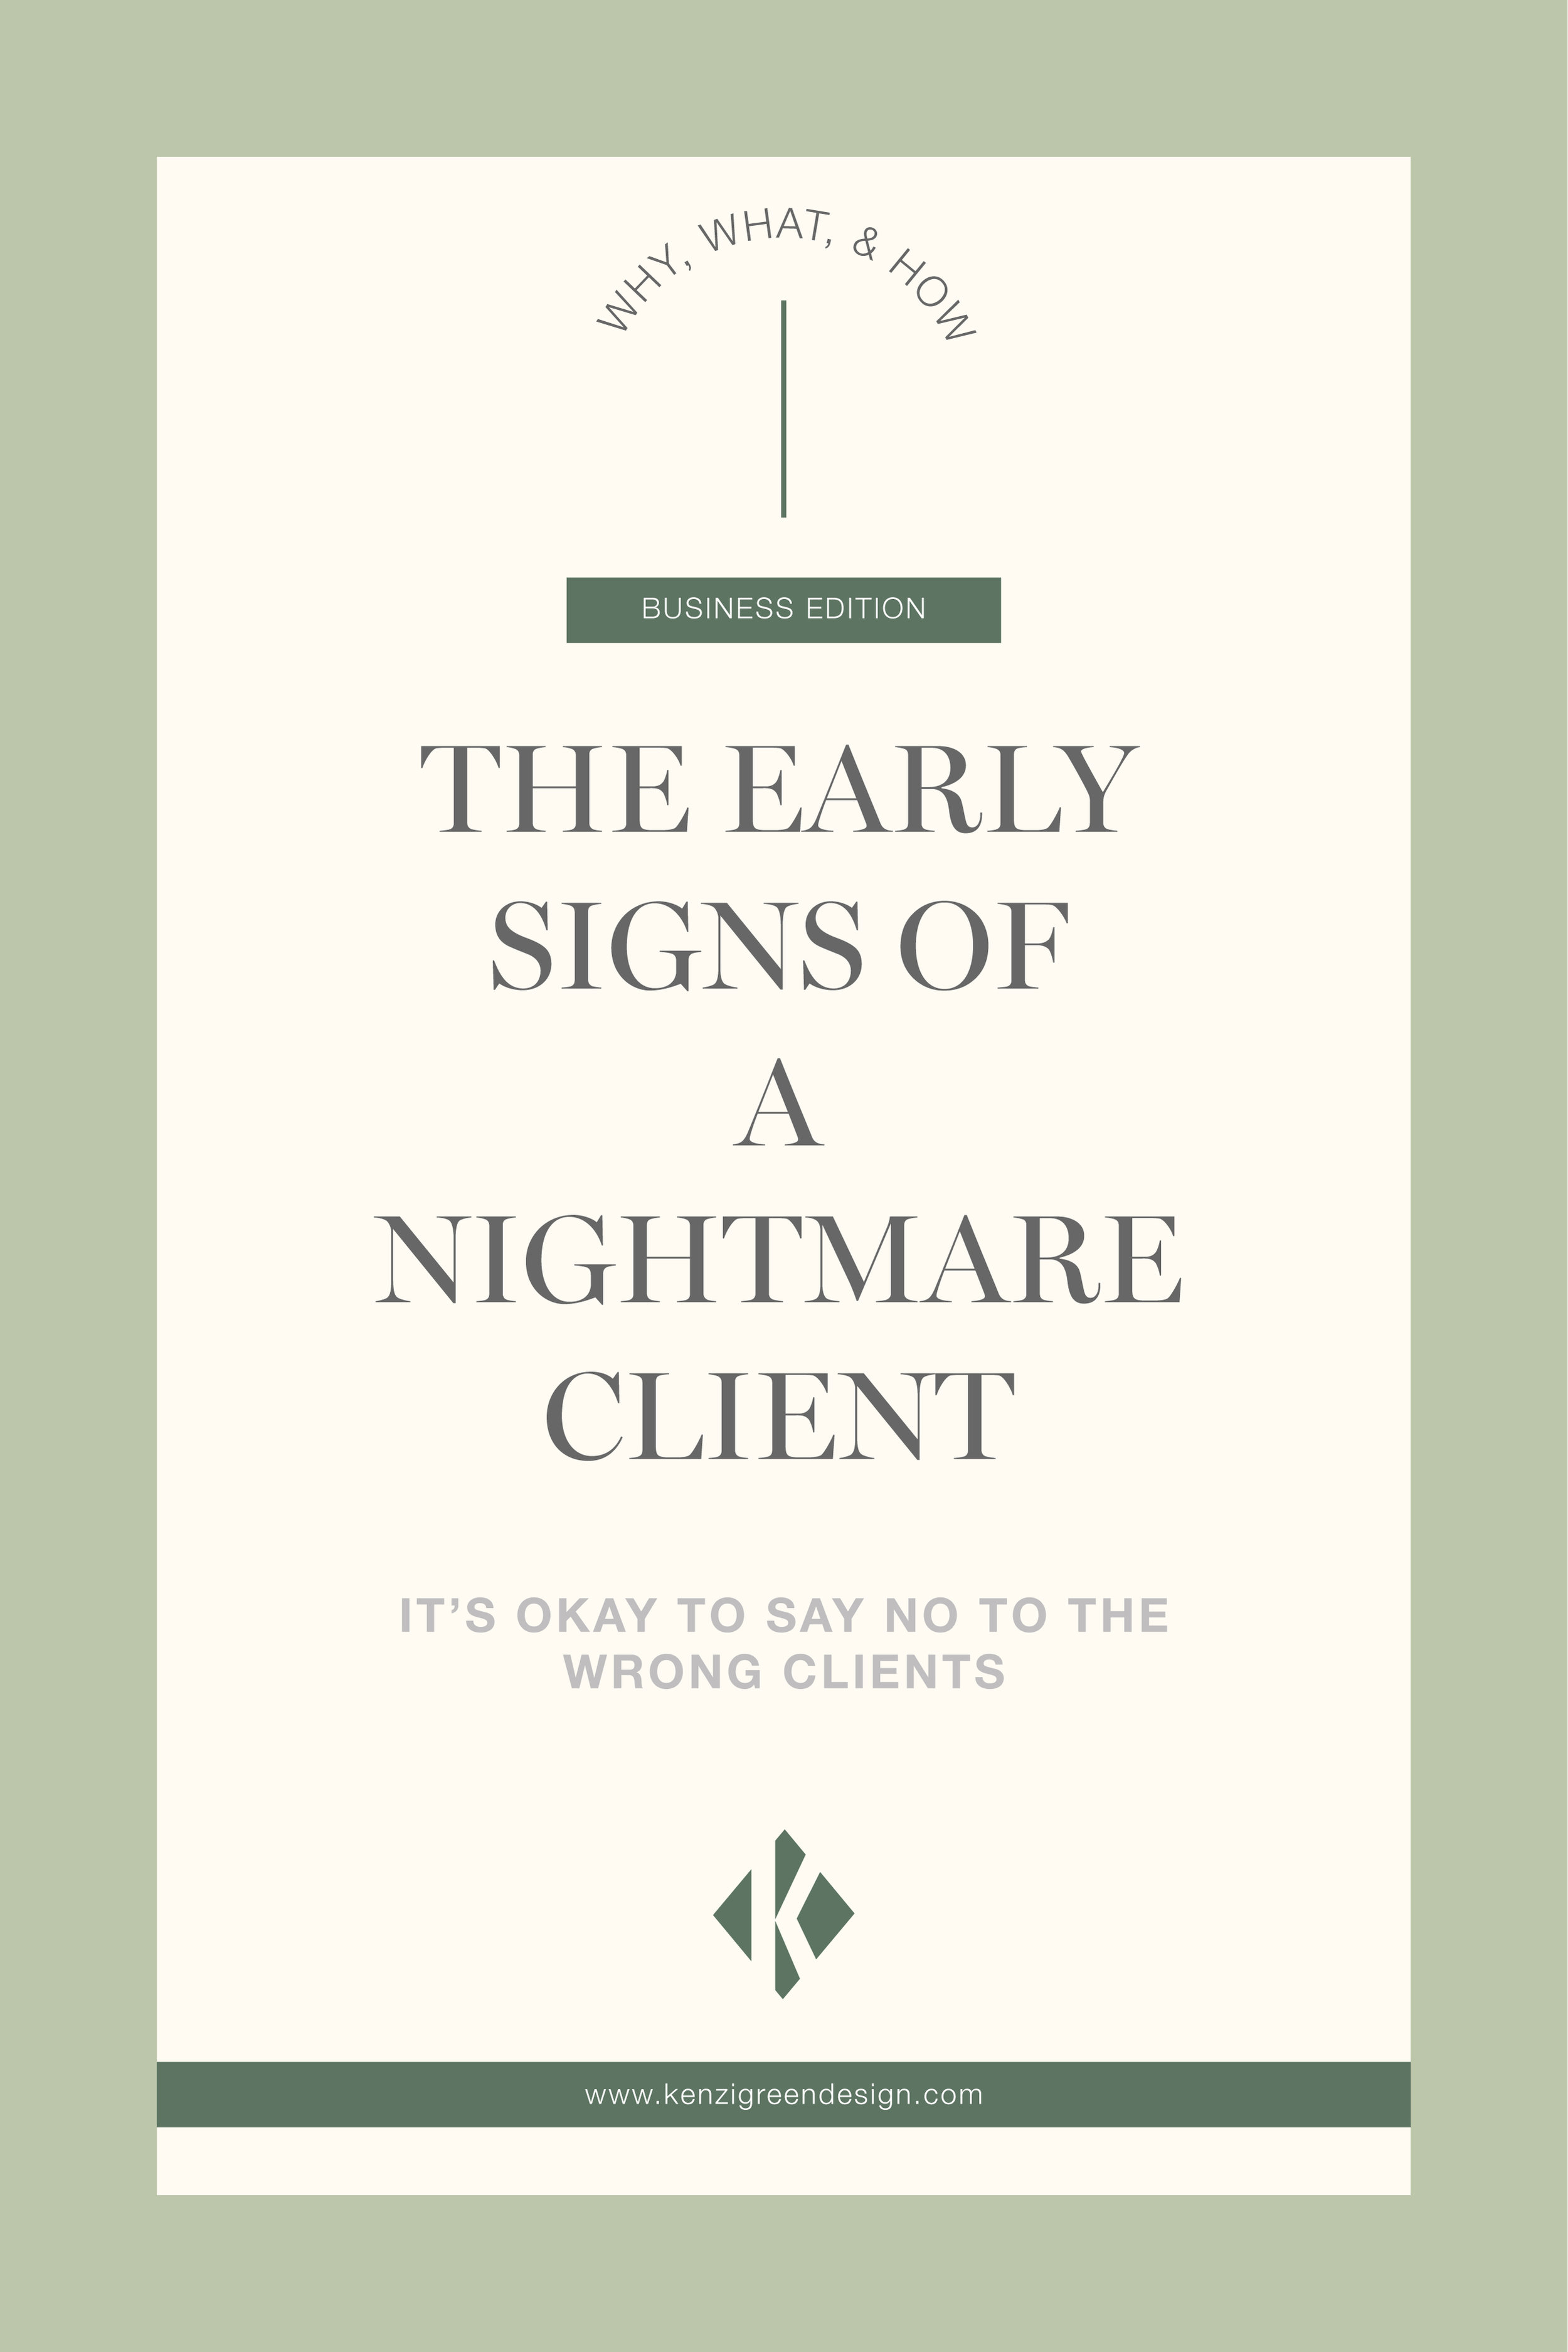 The Early Signs of a Nightmare Client. (It's okay to say no to the wrong clients) #businesstips #clientredflags #businessowner #biztips